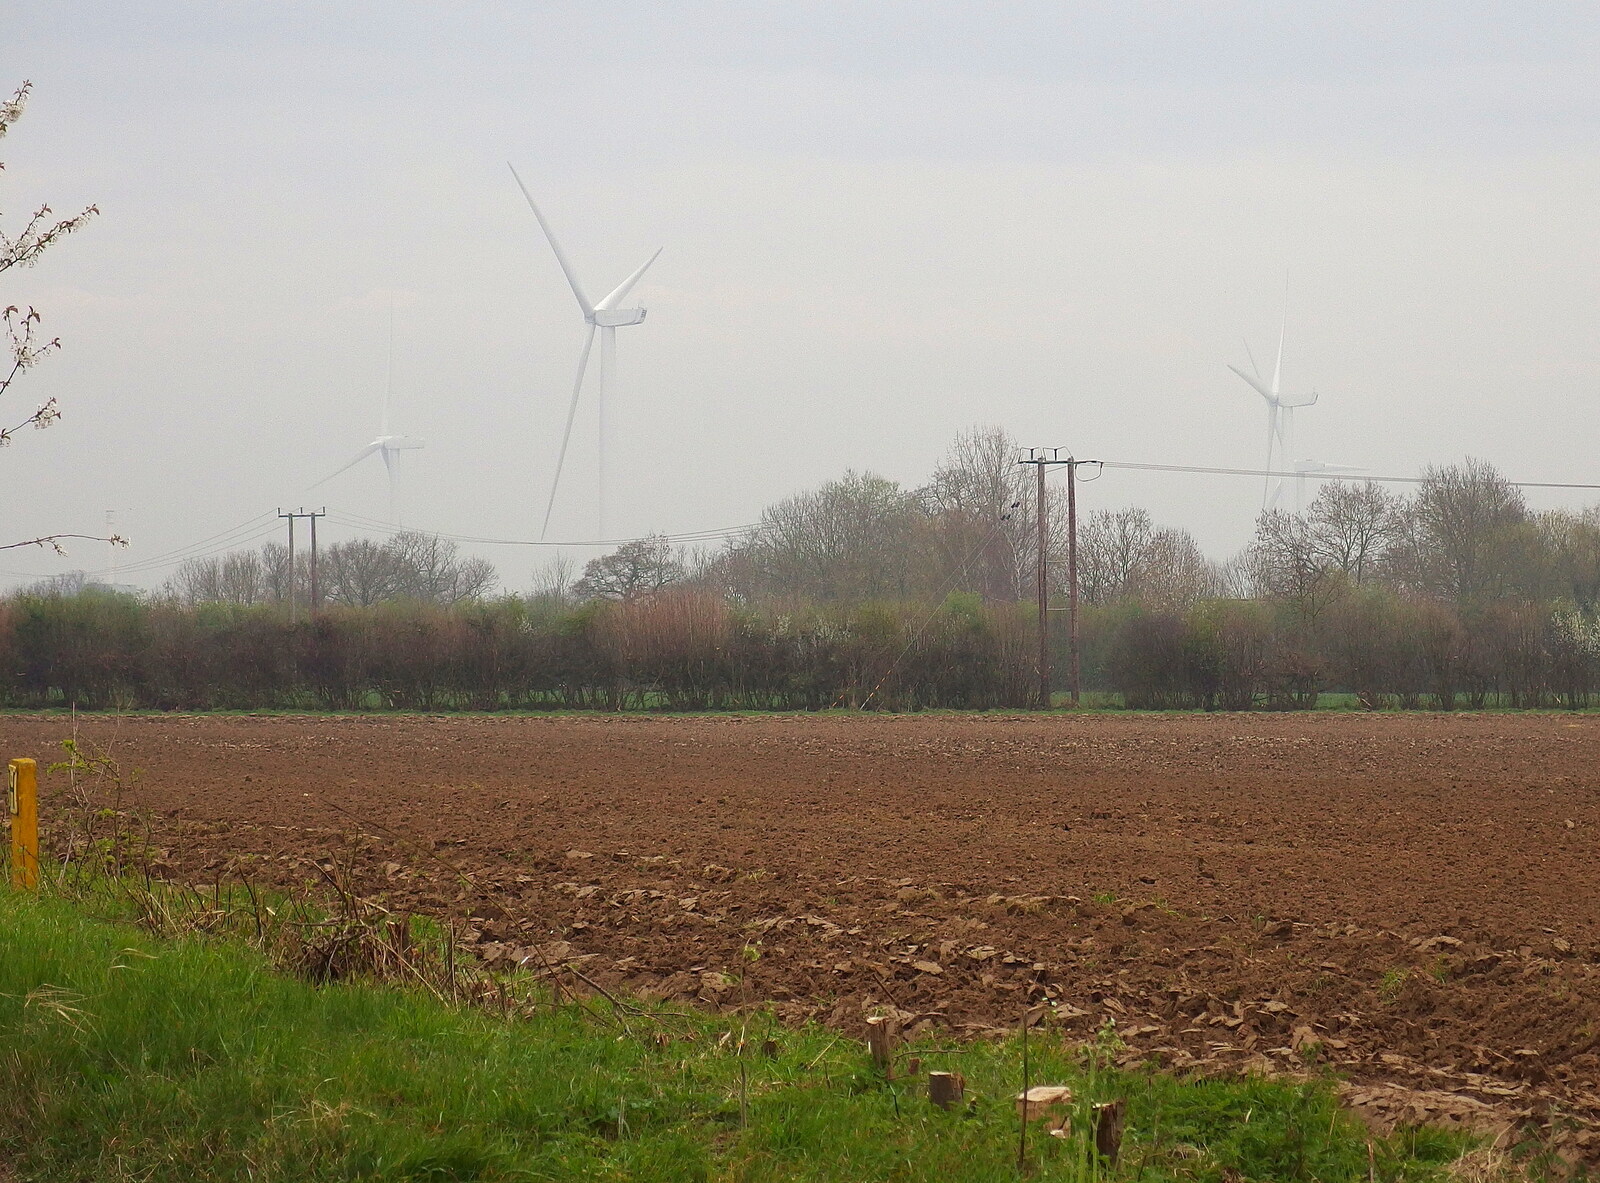 The four wind turbines lost in the pollution haze from A Trainey Sort of Week, Liverpool Street, City of London - 3rd April 2014